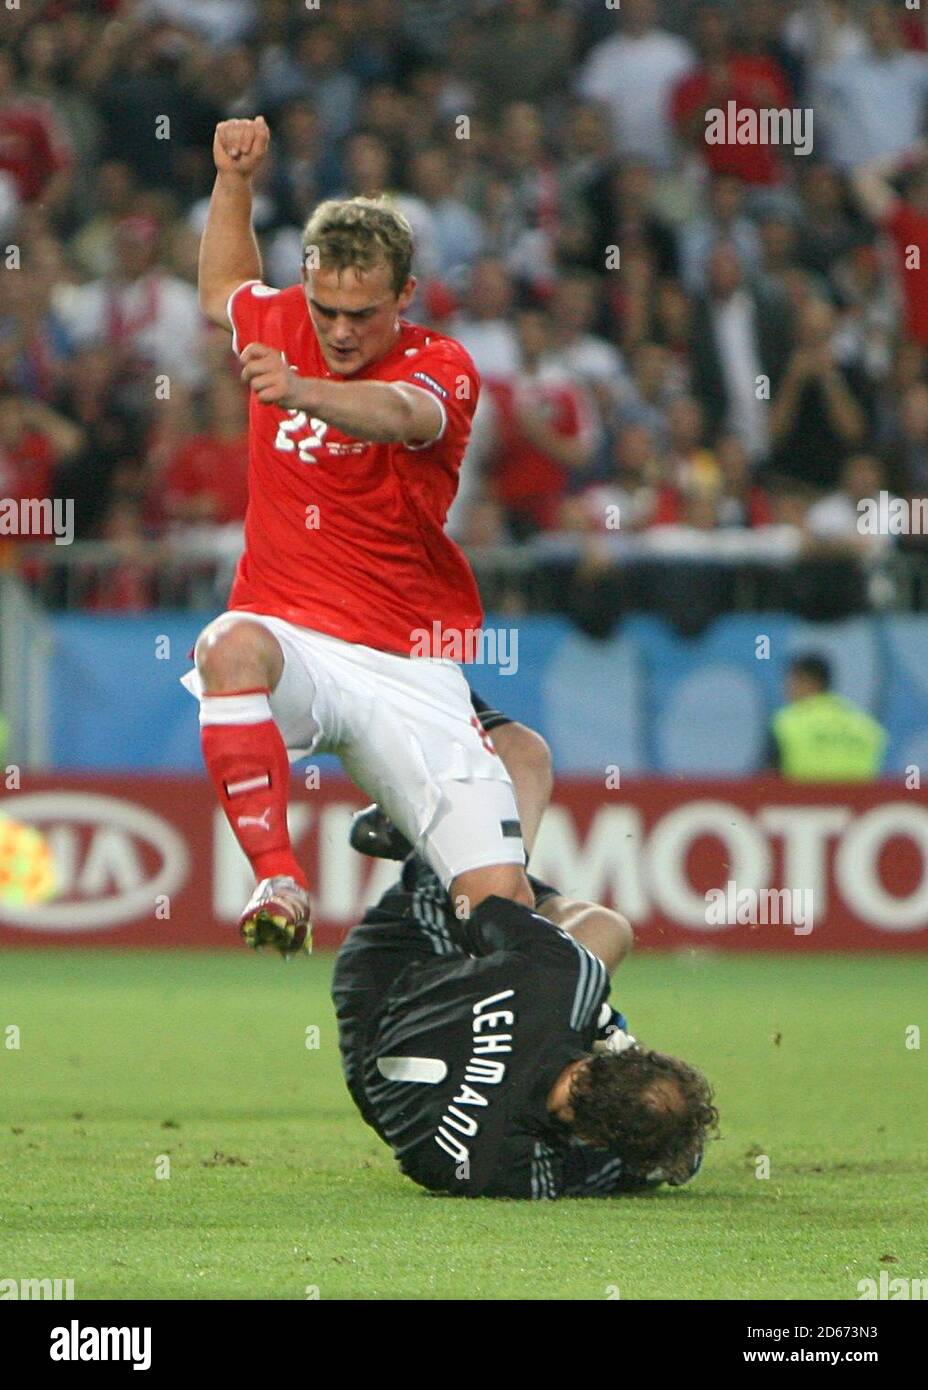 Austria's Erwin Hoffer collides with Germany's goalkeeper Jens Lehmann as they go for the ball Stock Photo